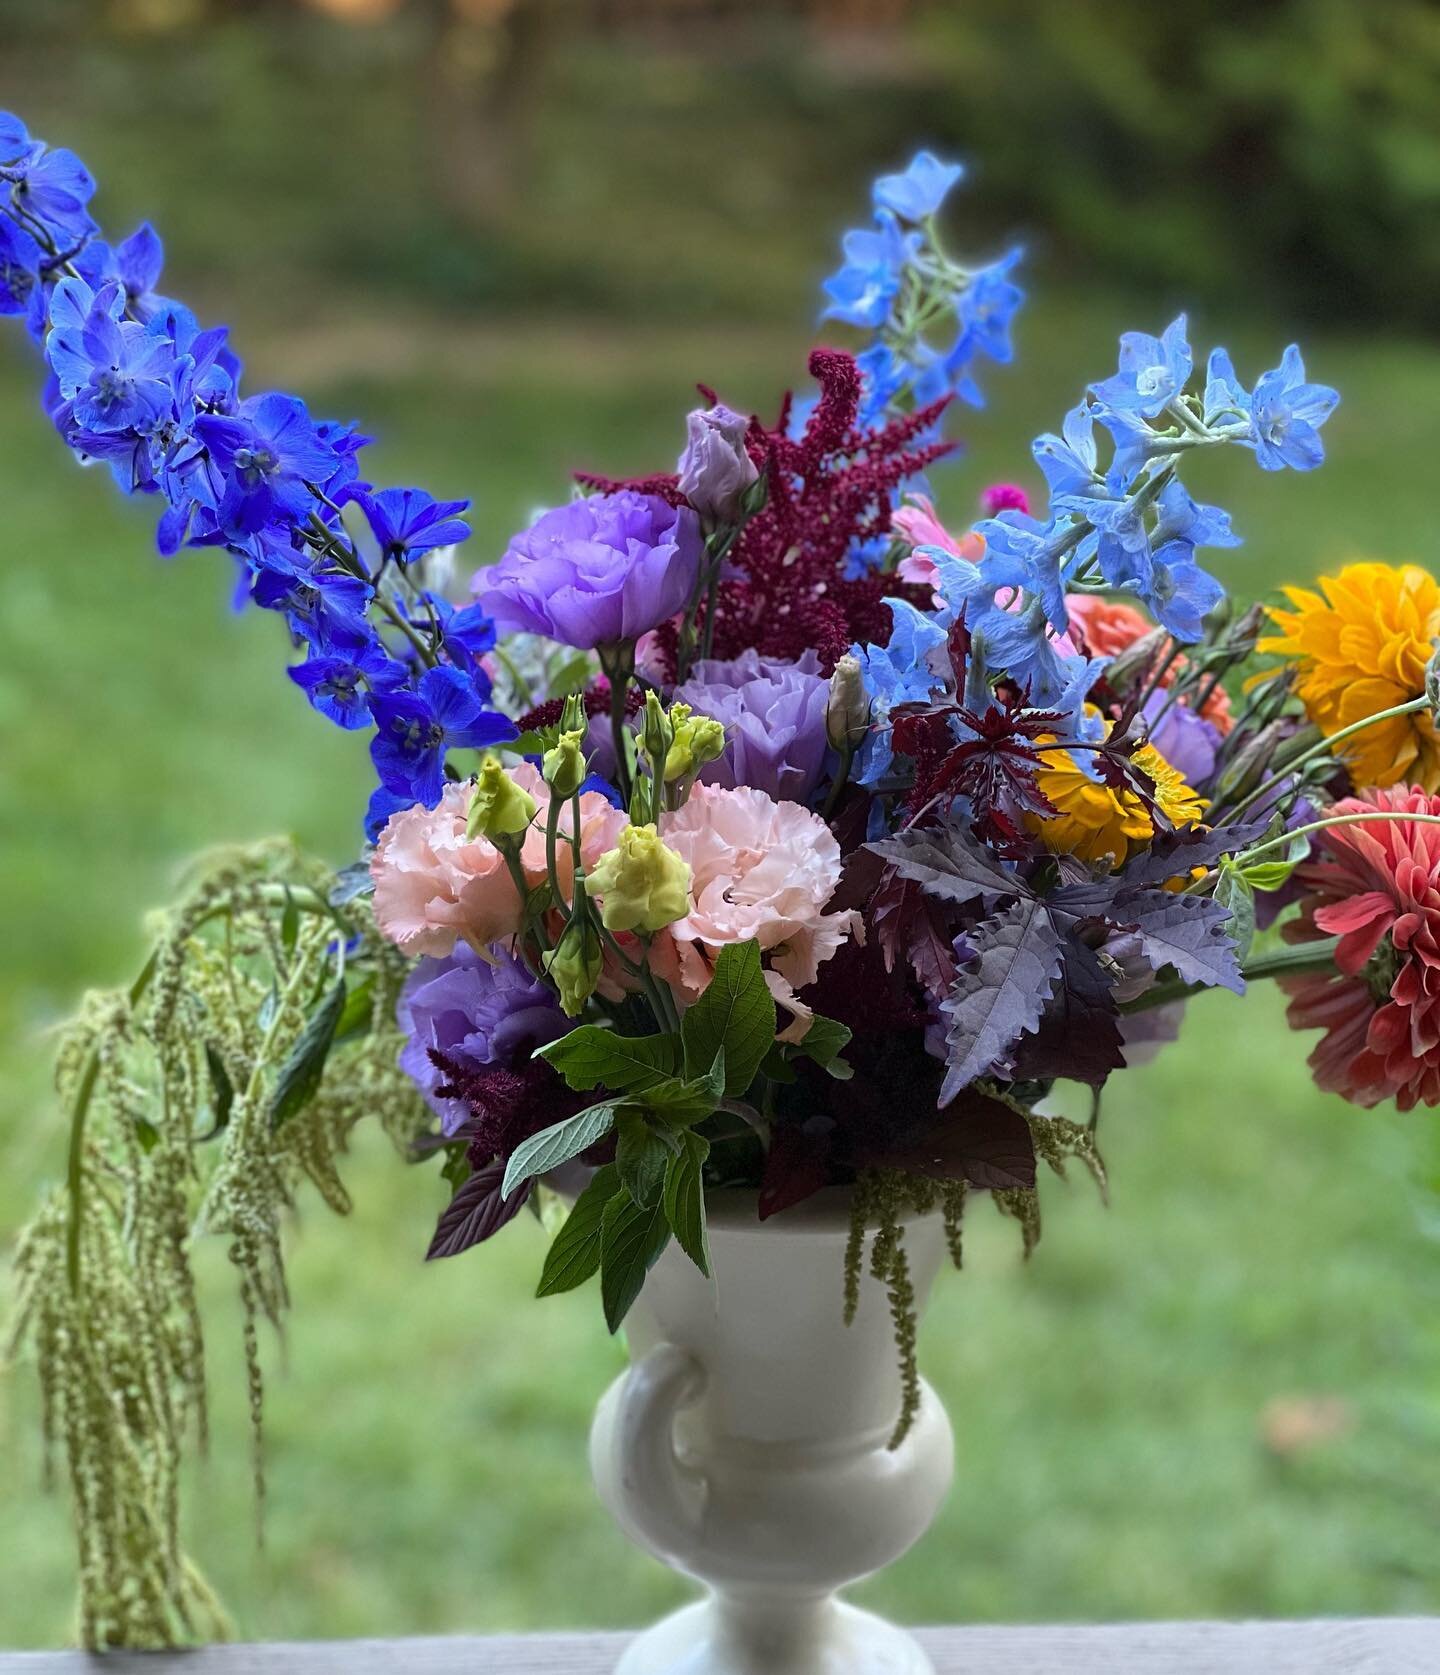 We spent the morning meeting @hiddenvaleflowers, and what a treat it was!  Carolyn sent us on our way with a bucket of the most vibrant, healthy, gorgeous flowers that she casually cut as we talked.  Thank you for sharing your time with us - there is